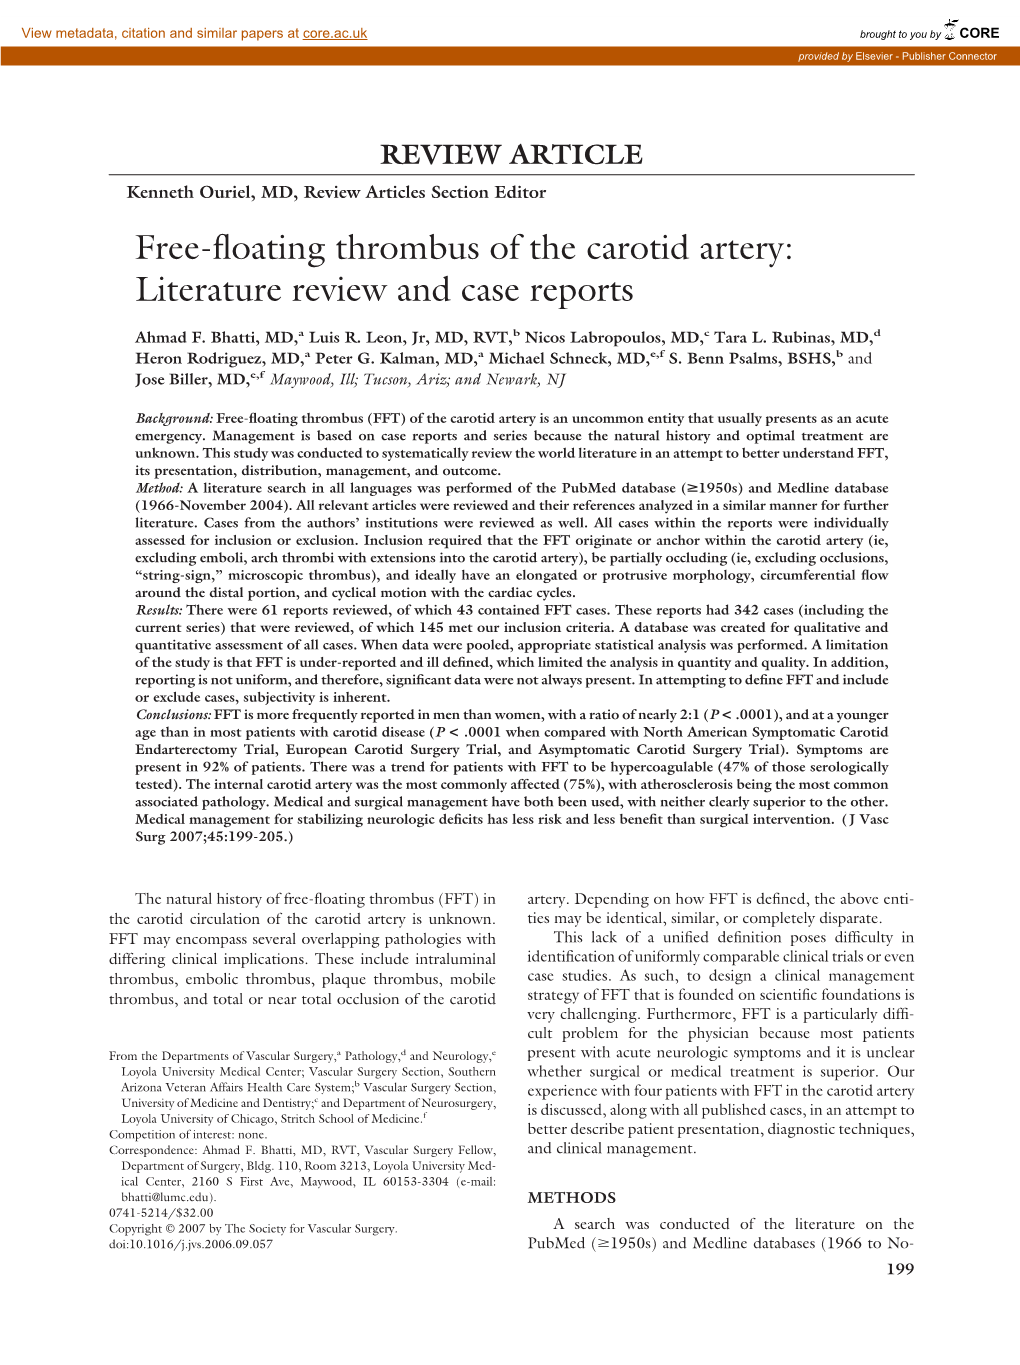 Free-Floating Thrombus of the Carotid Artery